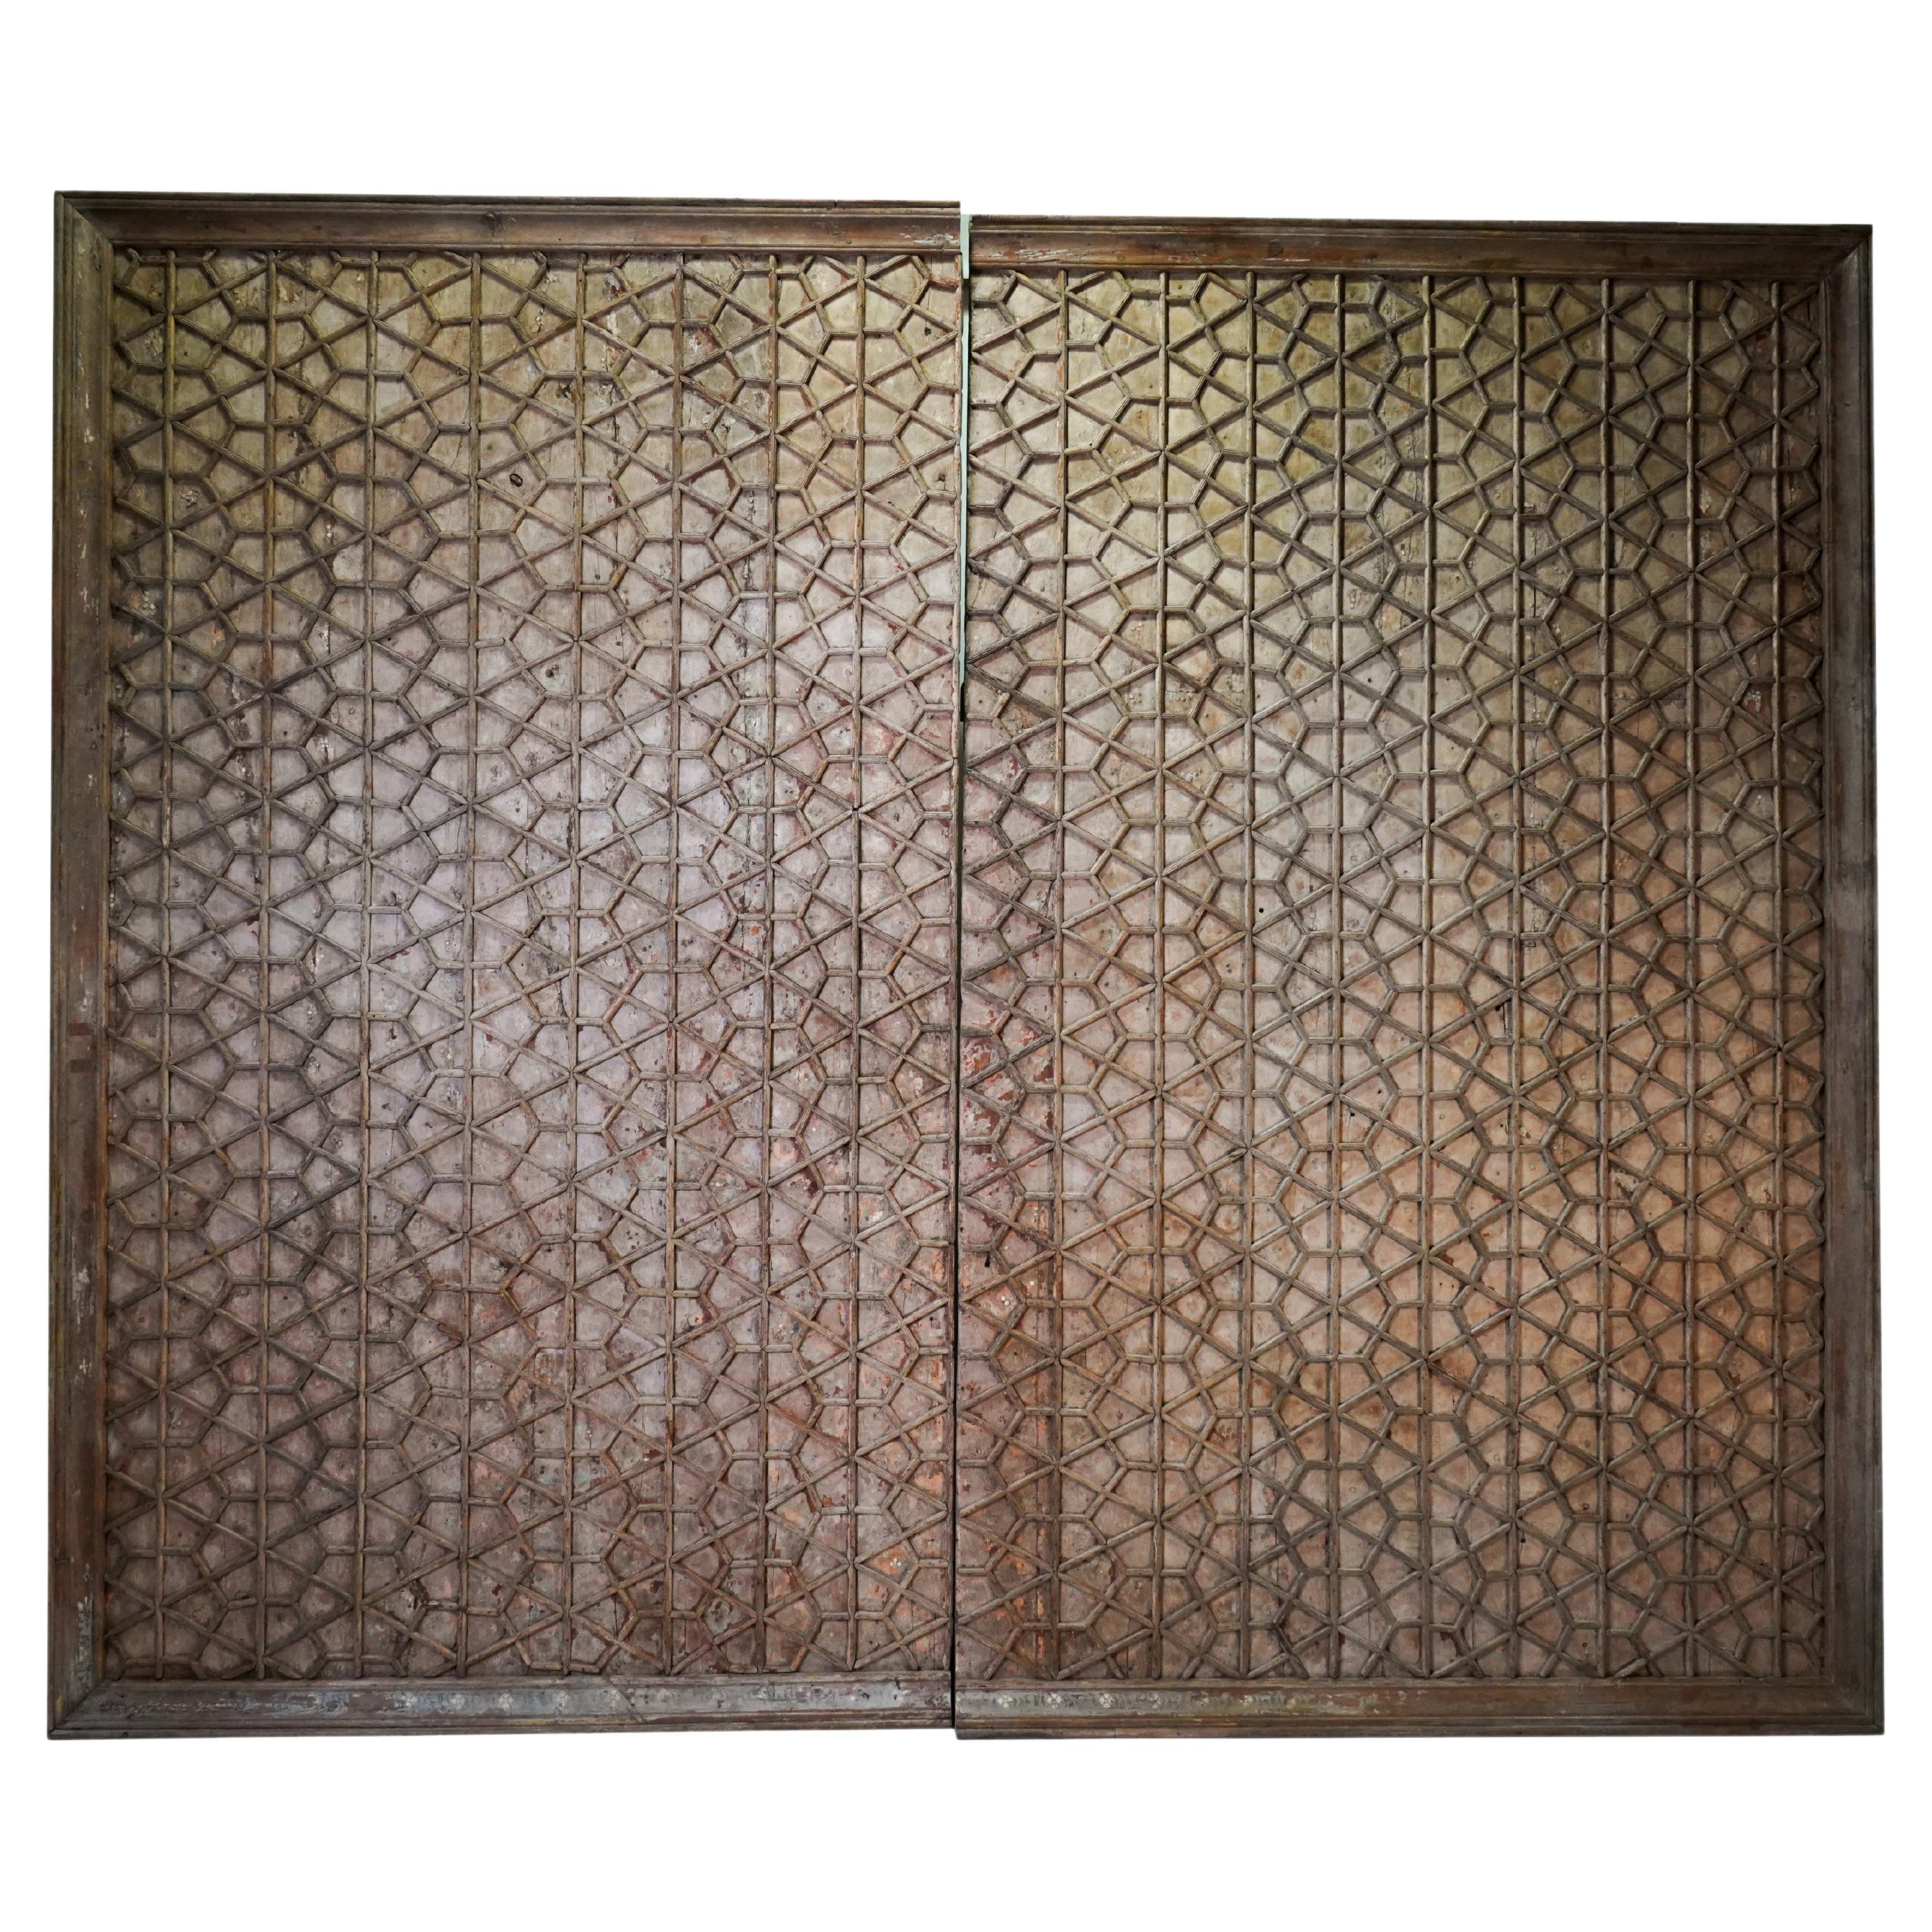 A Monumental Indian Ceiling Panel with Original Patina